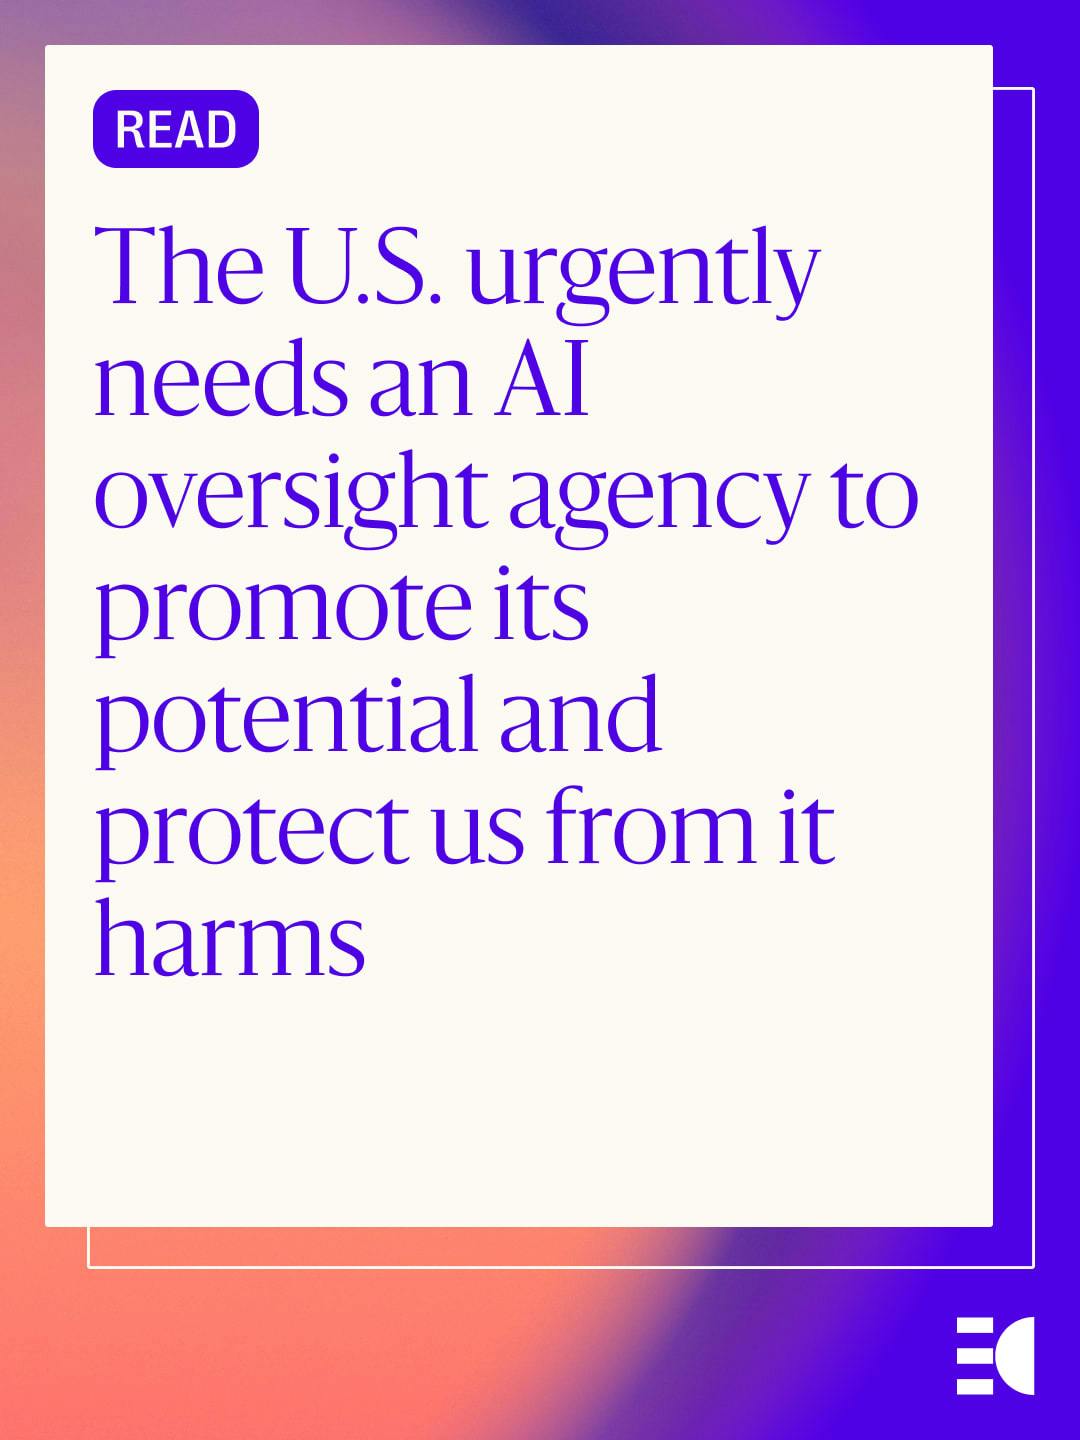 The U.S. urgently needs an AI oversight agency to promote its potential and protect us from its harms